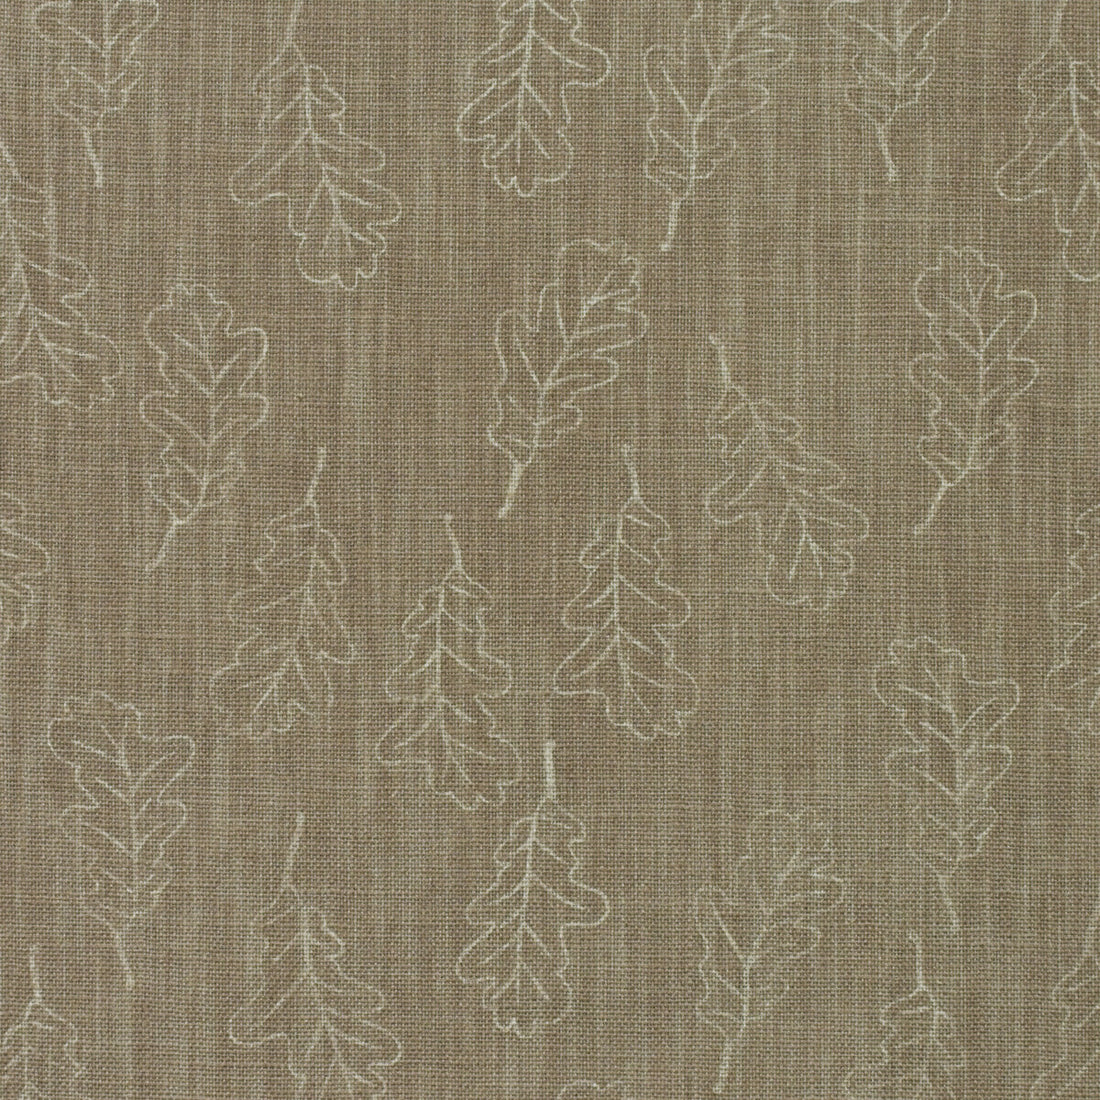 Noble Oak fabric in twig color - pattern AM100398.16.0 - by Kravet Couture in the Andrew Martin Woodland By Sophie Paterson collection